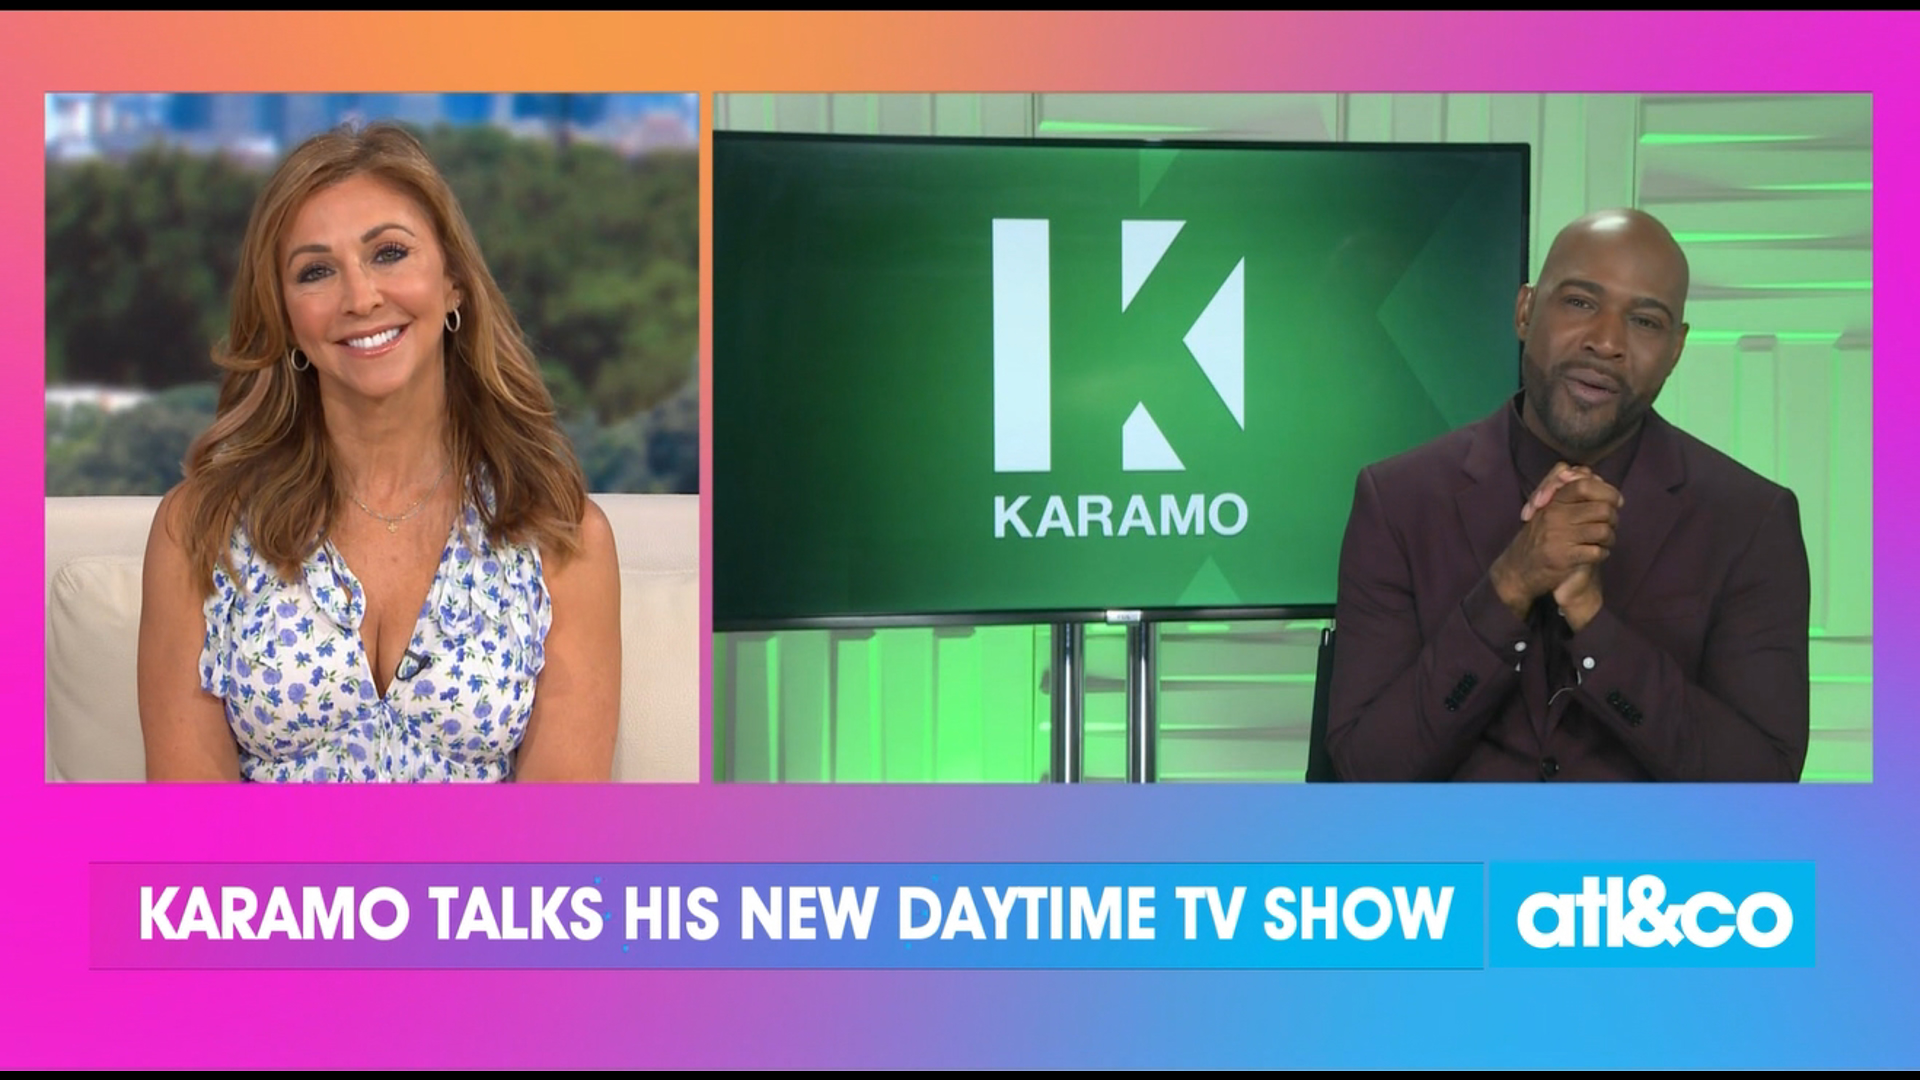 'Queer Eye' star Karamo is coming to daytime with an all-new talk show, weekdays at 5:00 on WATL.